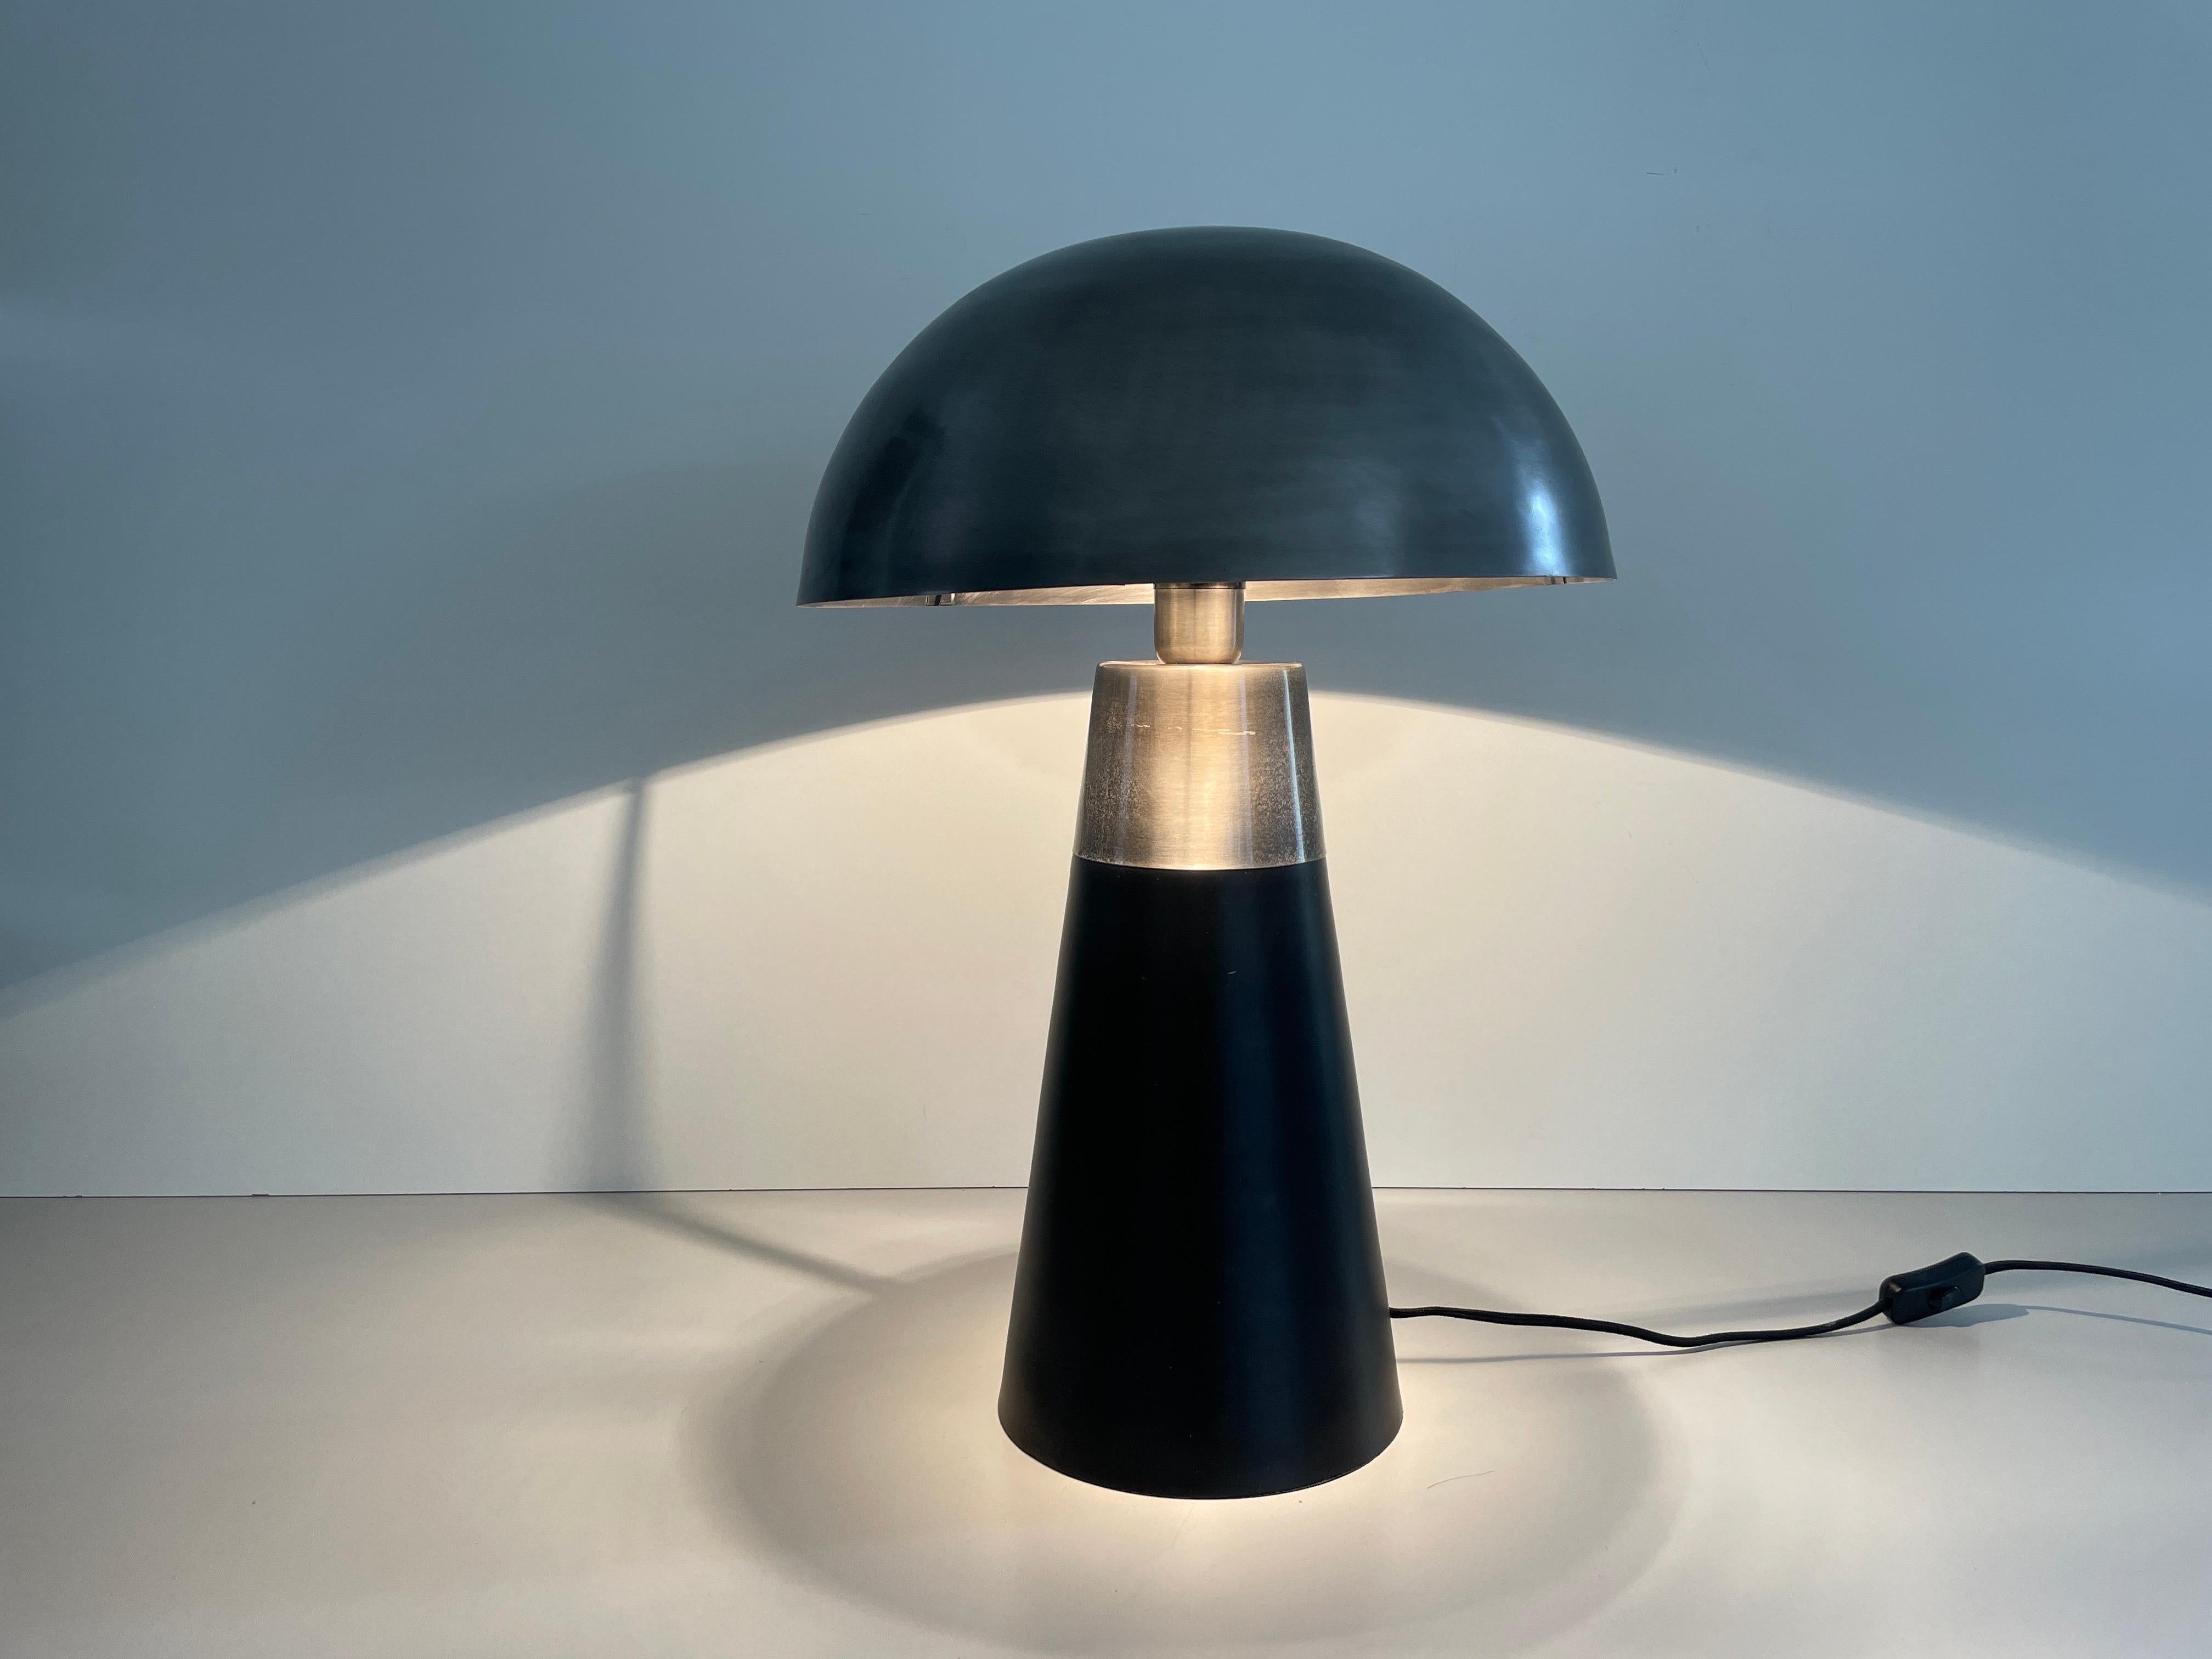 Muschroom and Conic Design Large Table Lamp by LAMBERT, 1980s, Germany For Sale 5